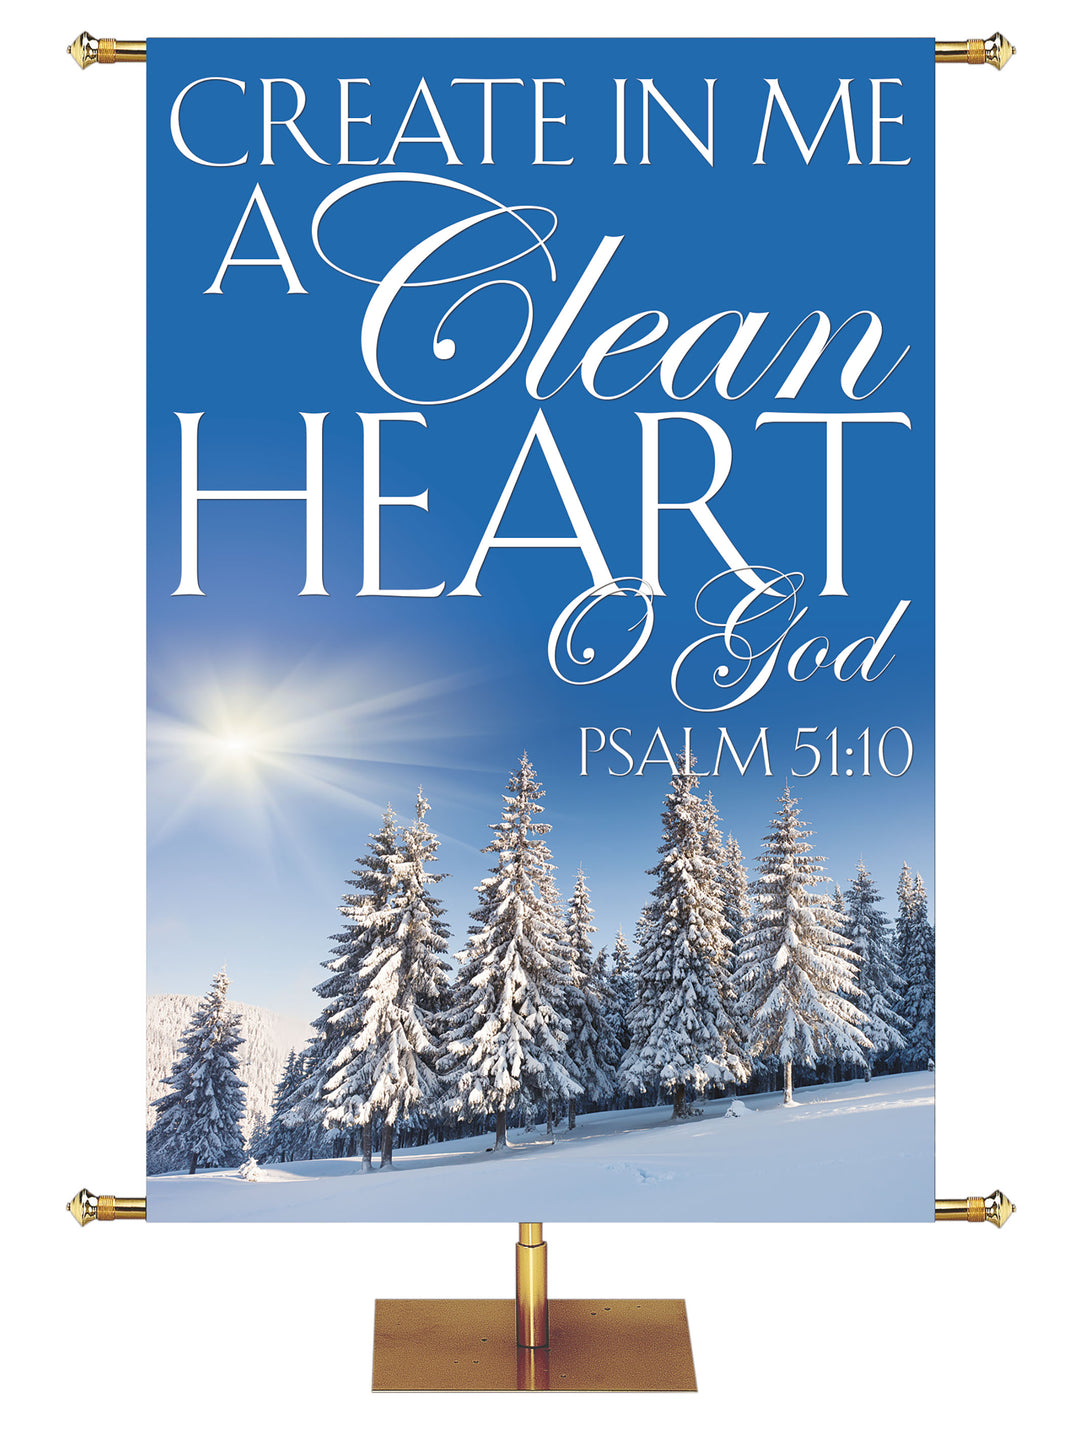 Portraits of Sacred Winter Create In Me a Clean Heart D - Christmas Banners - PraiseBanners